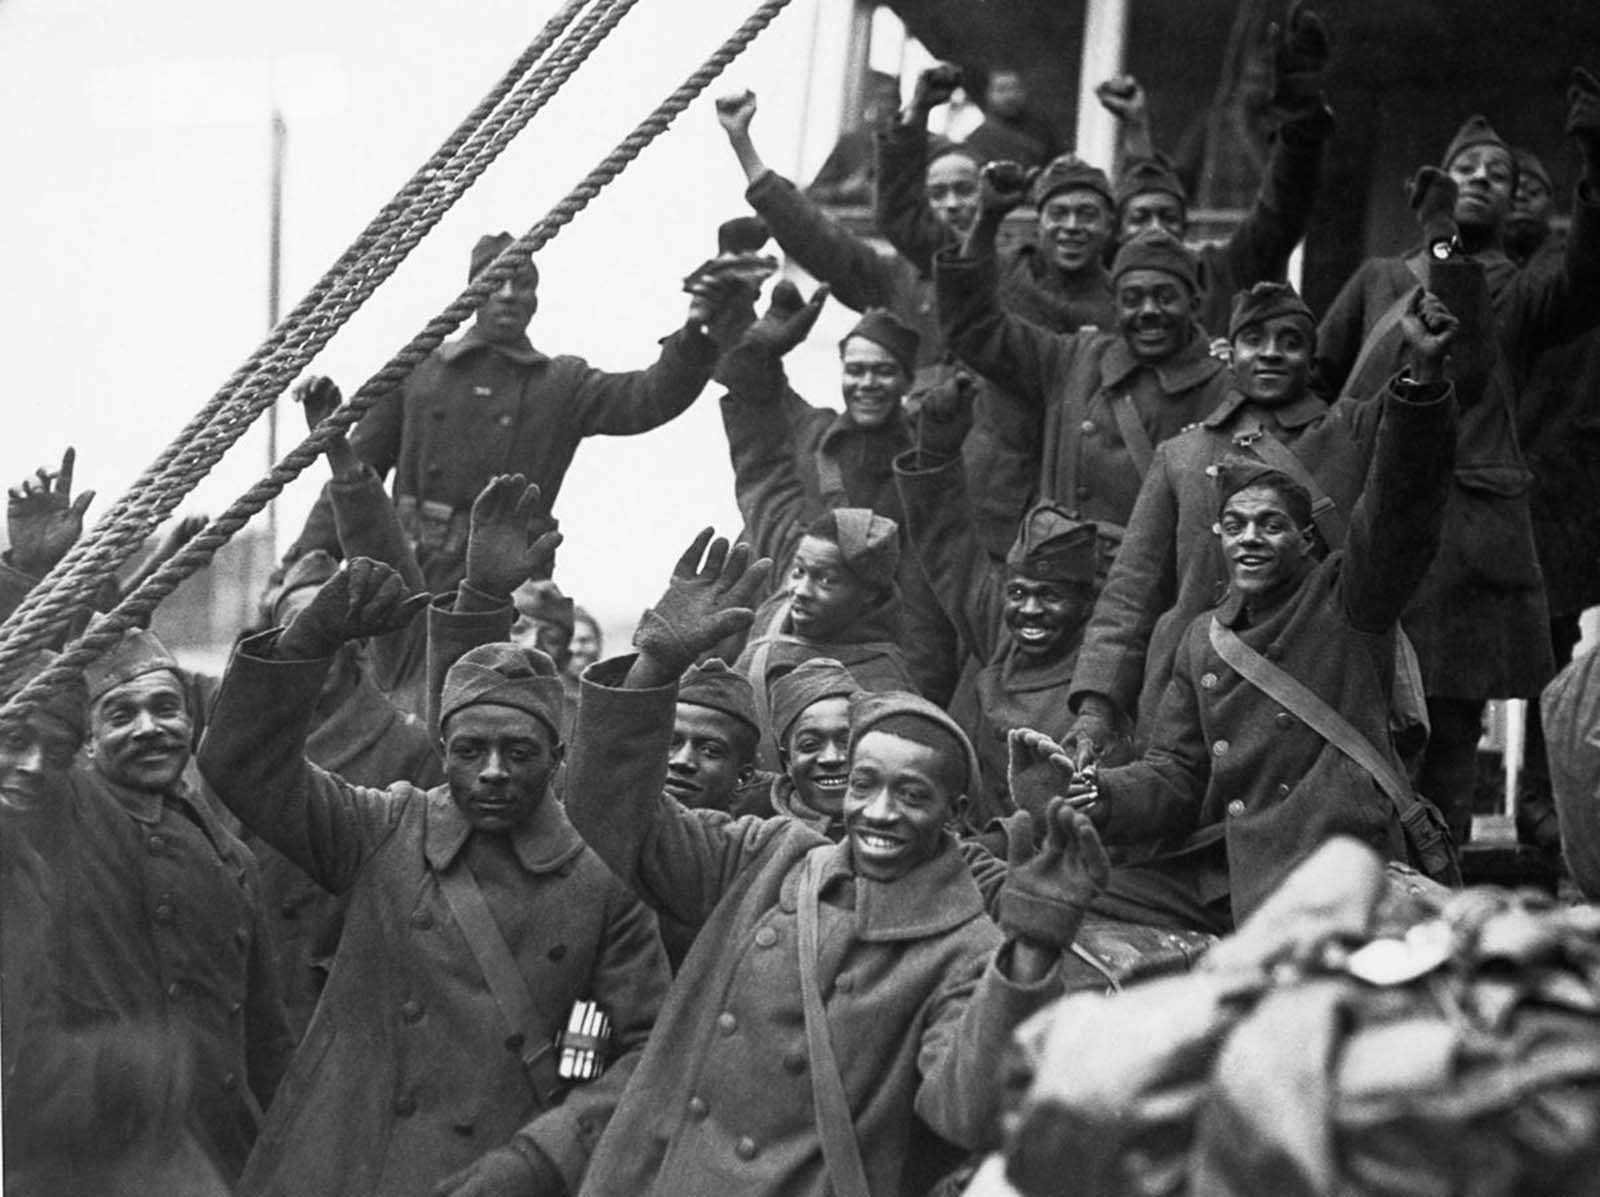 Harlem Hellfighters: The Brave African American Regiment renowned for courage despite Prejudice, during WWI